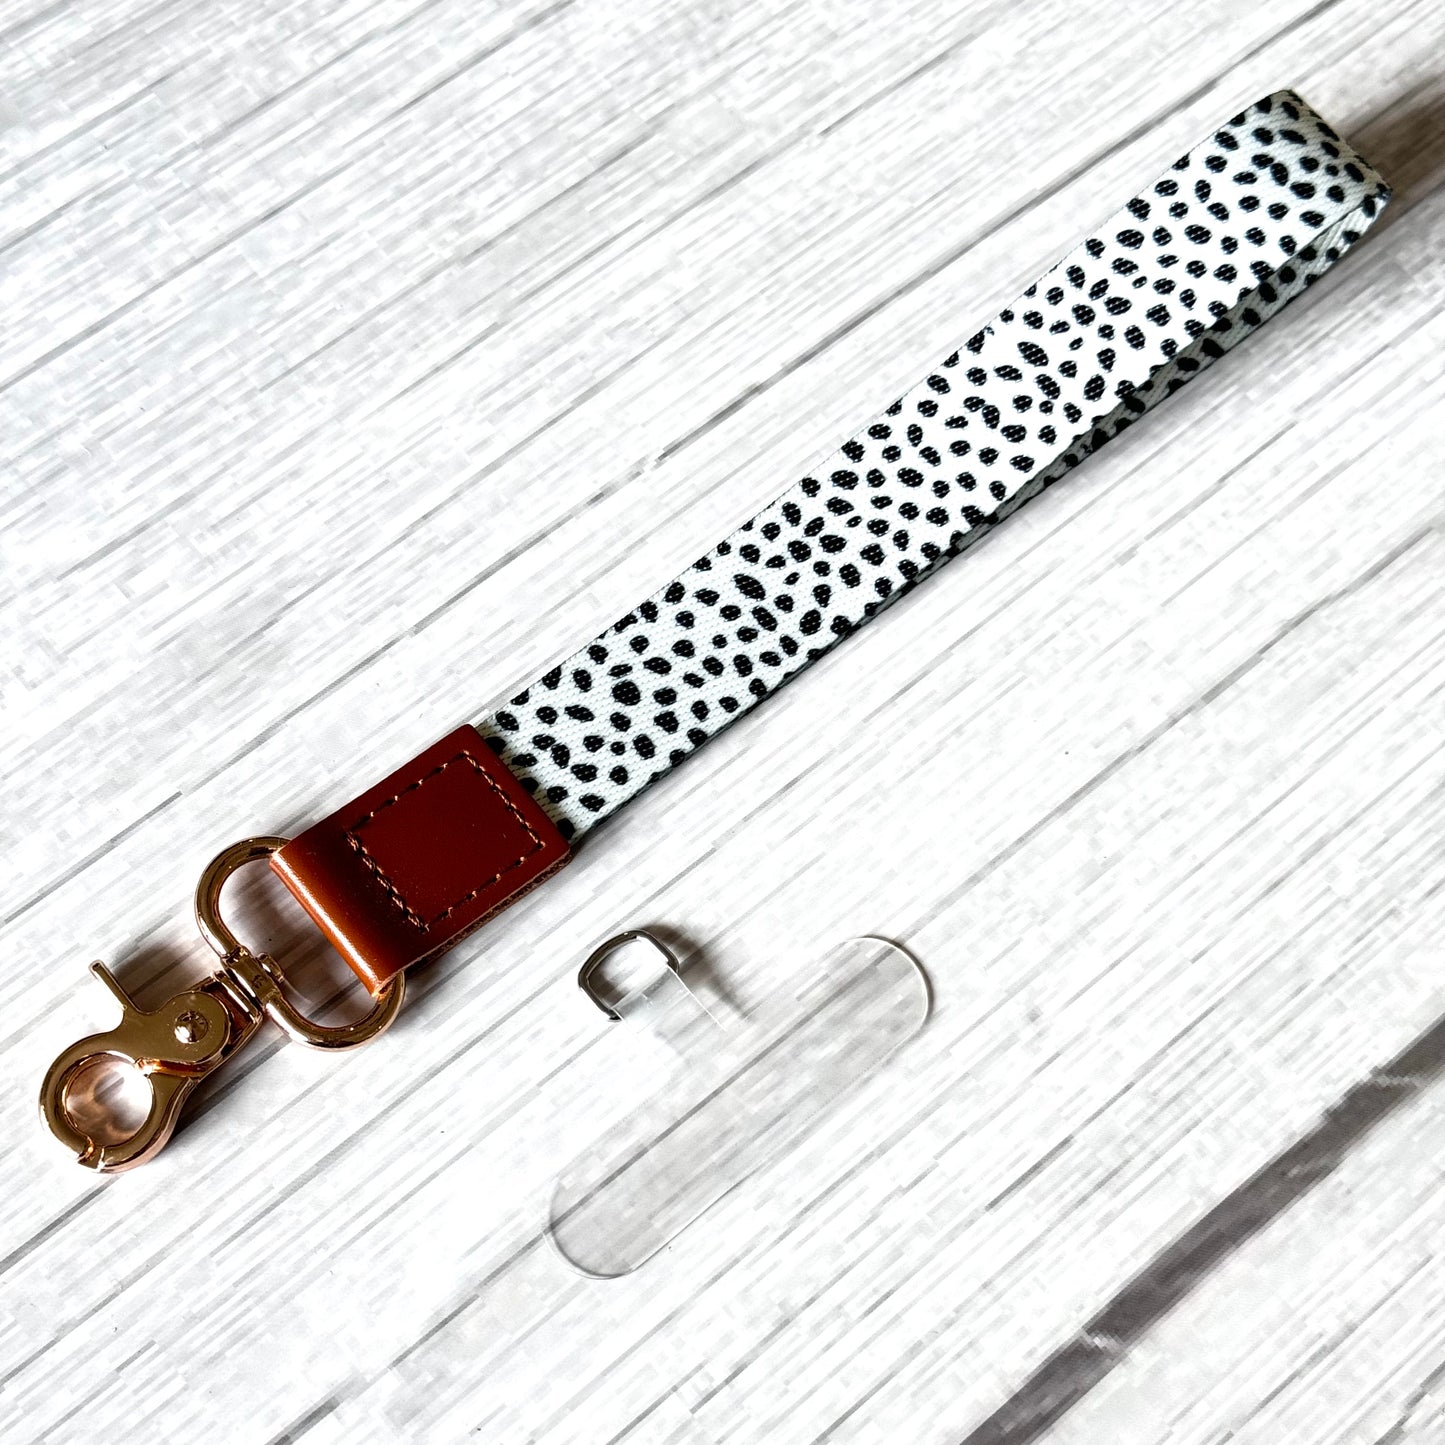 Phone Wrist Strap with Tether Tab - BLACK DOTS